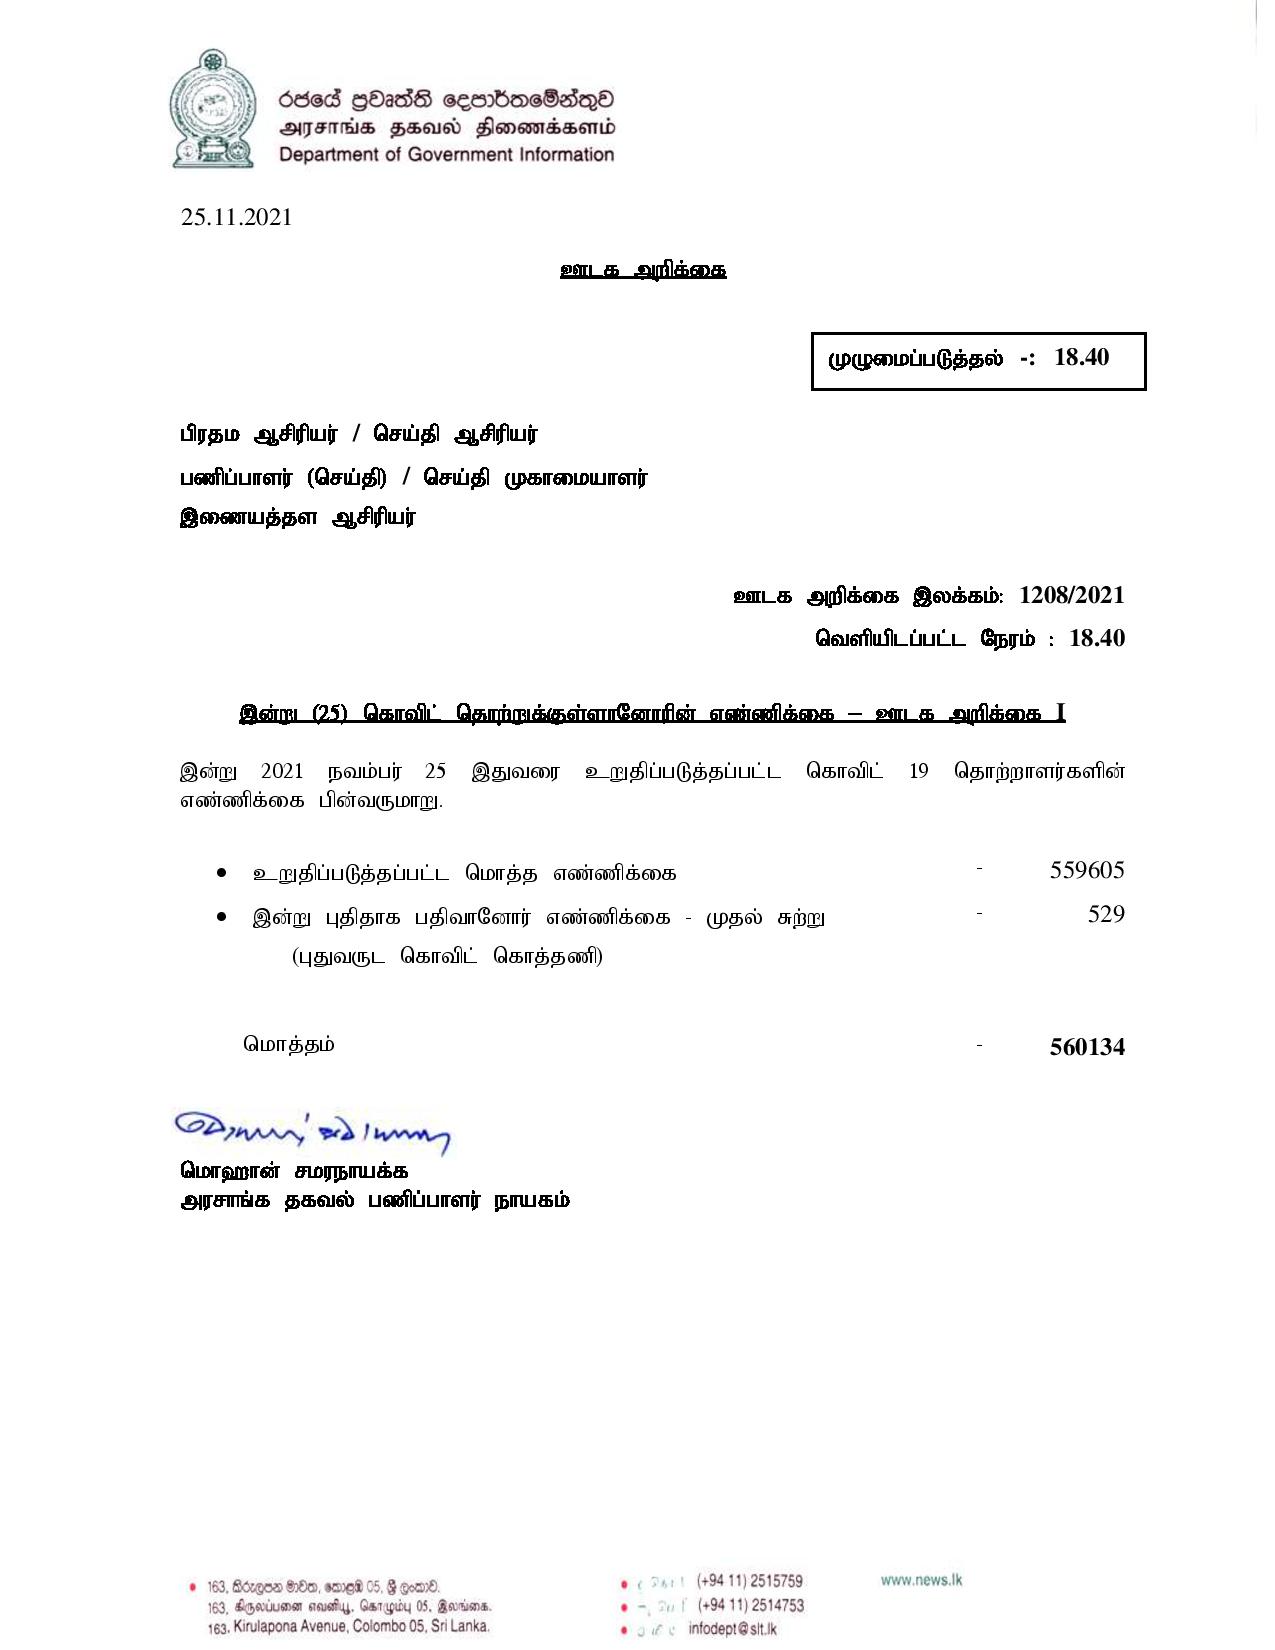 Release No 1208 Tamil page 001